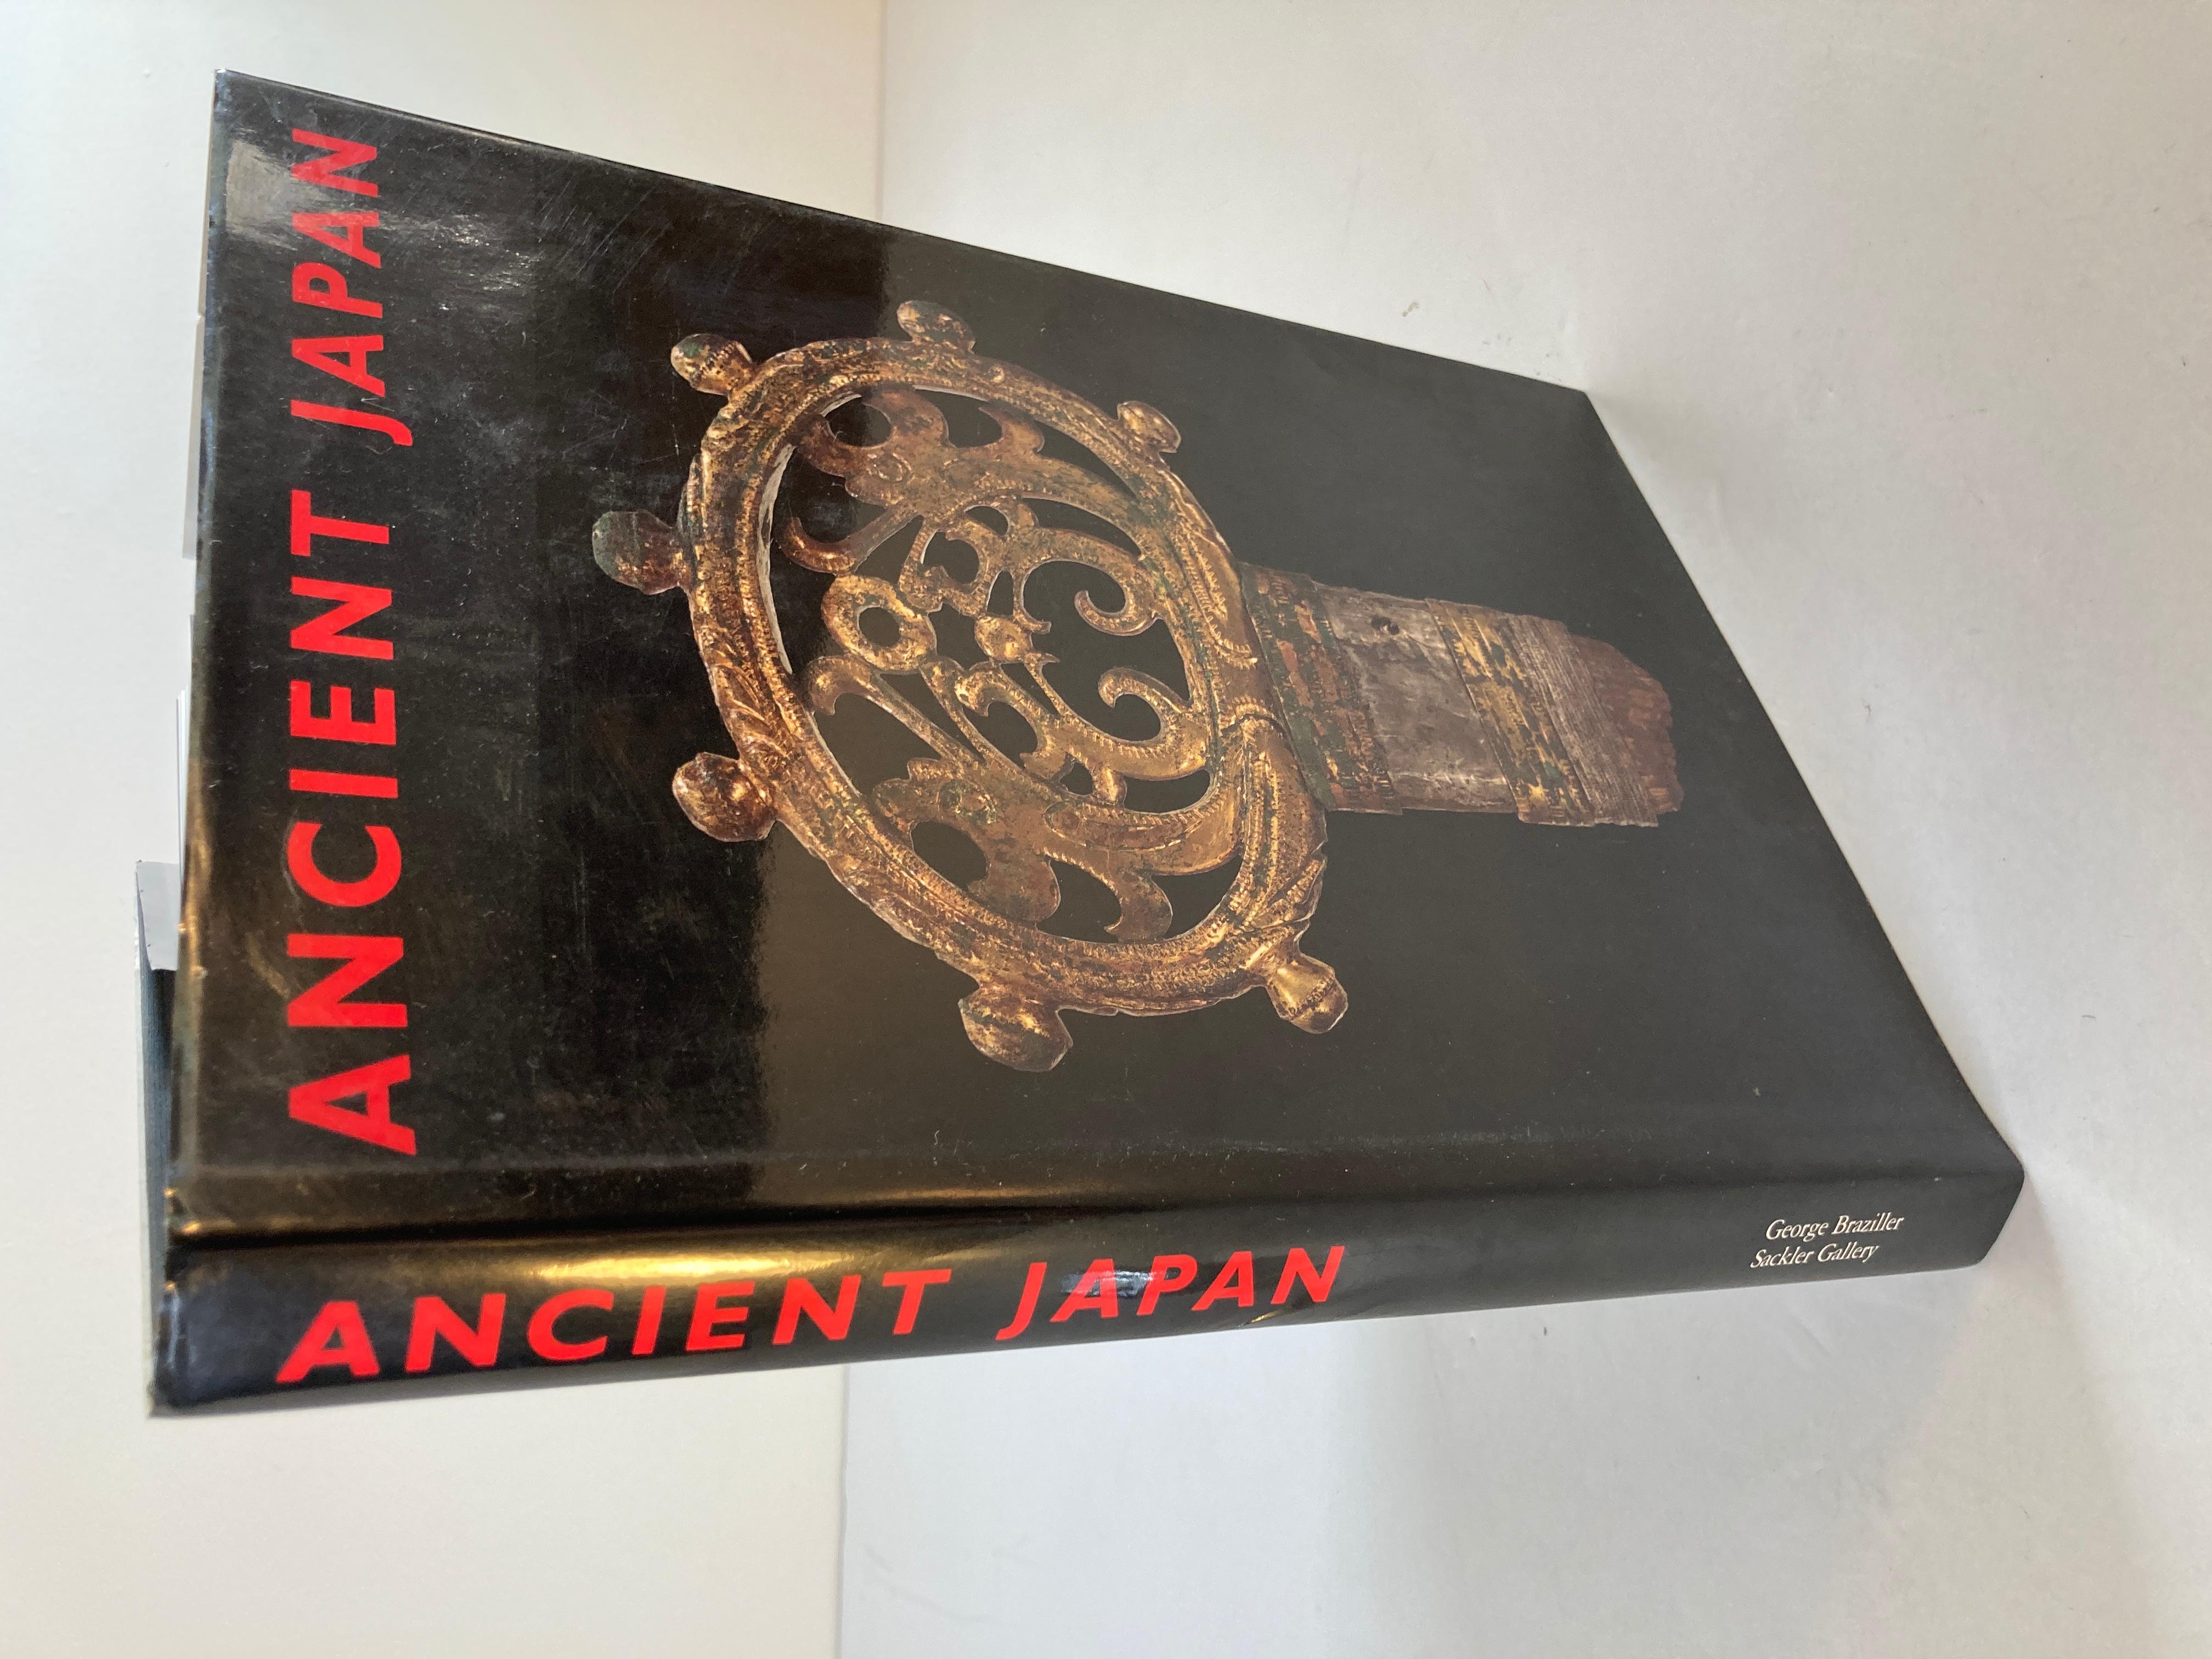 Japanese Ancient Japan Hardcover Art Book by Richard J. Pearson For Sale